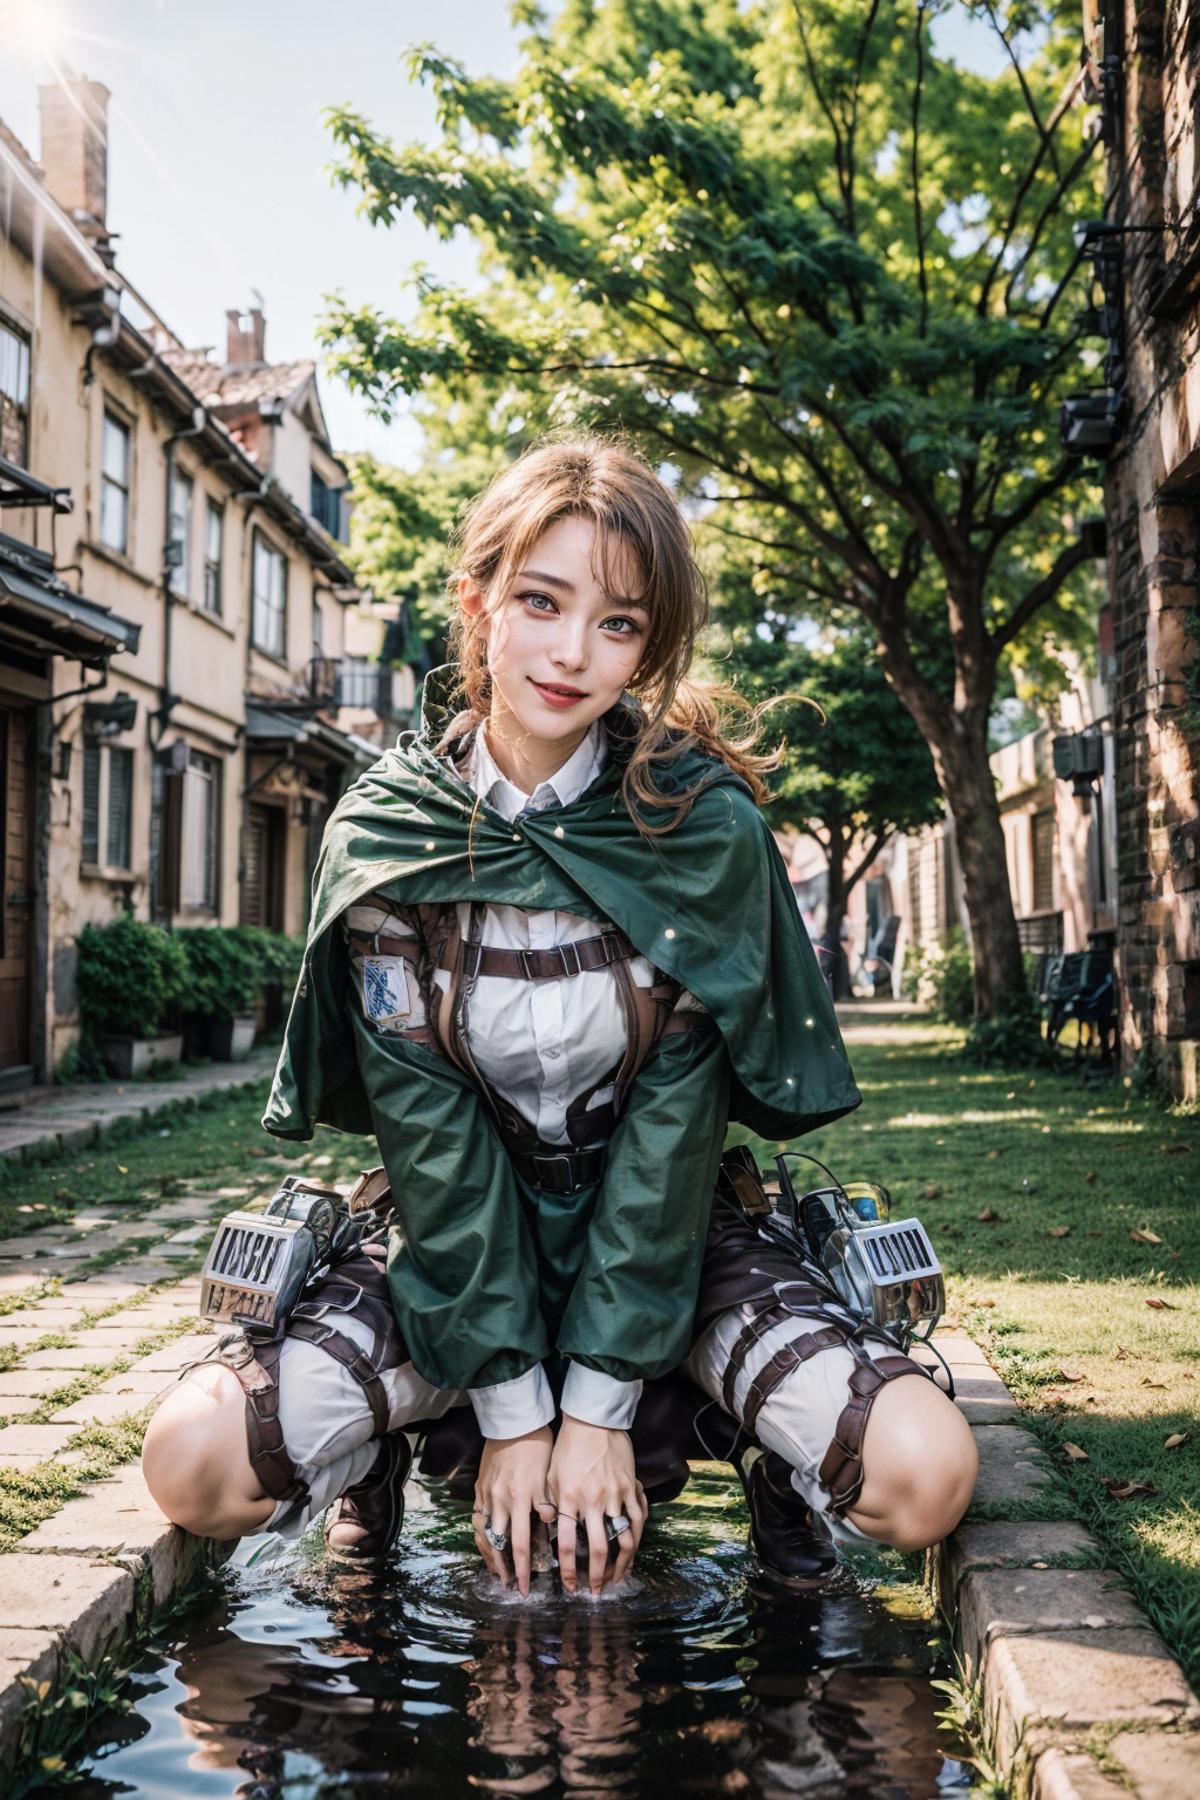 Attack on Titan Survey Corps suit image by 7533967